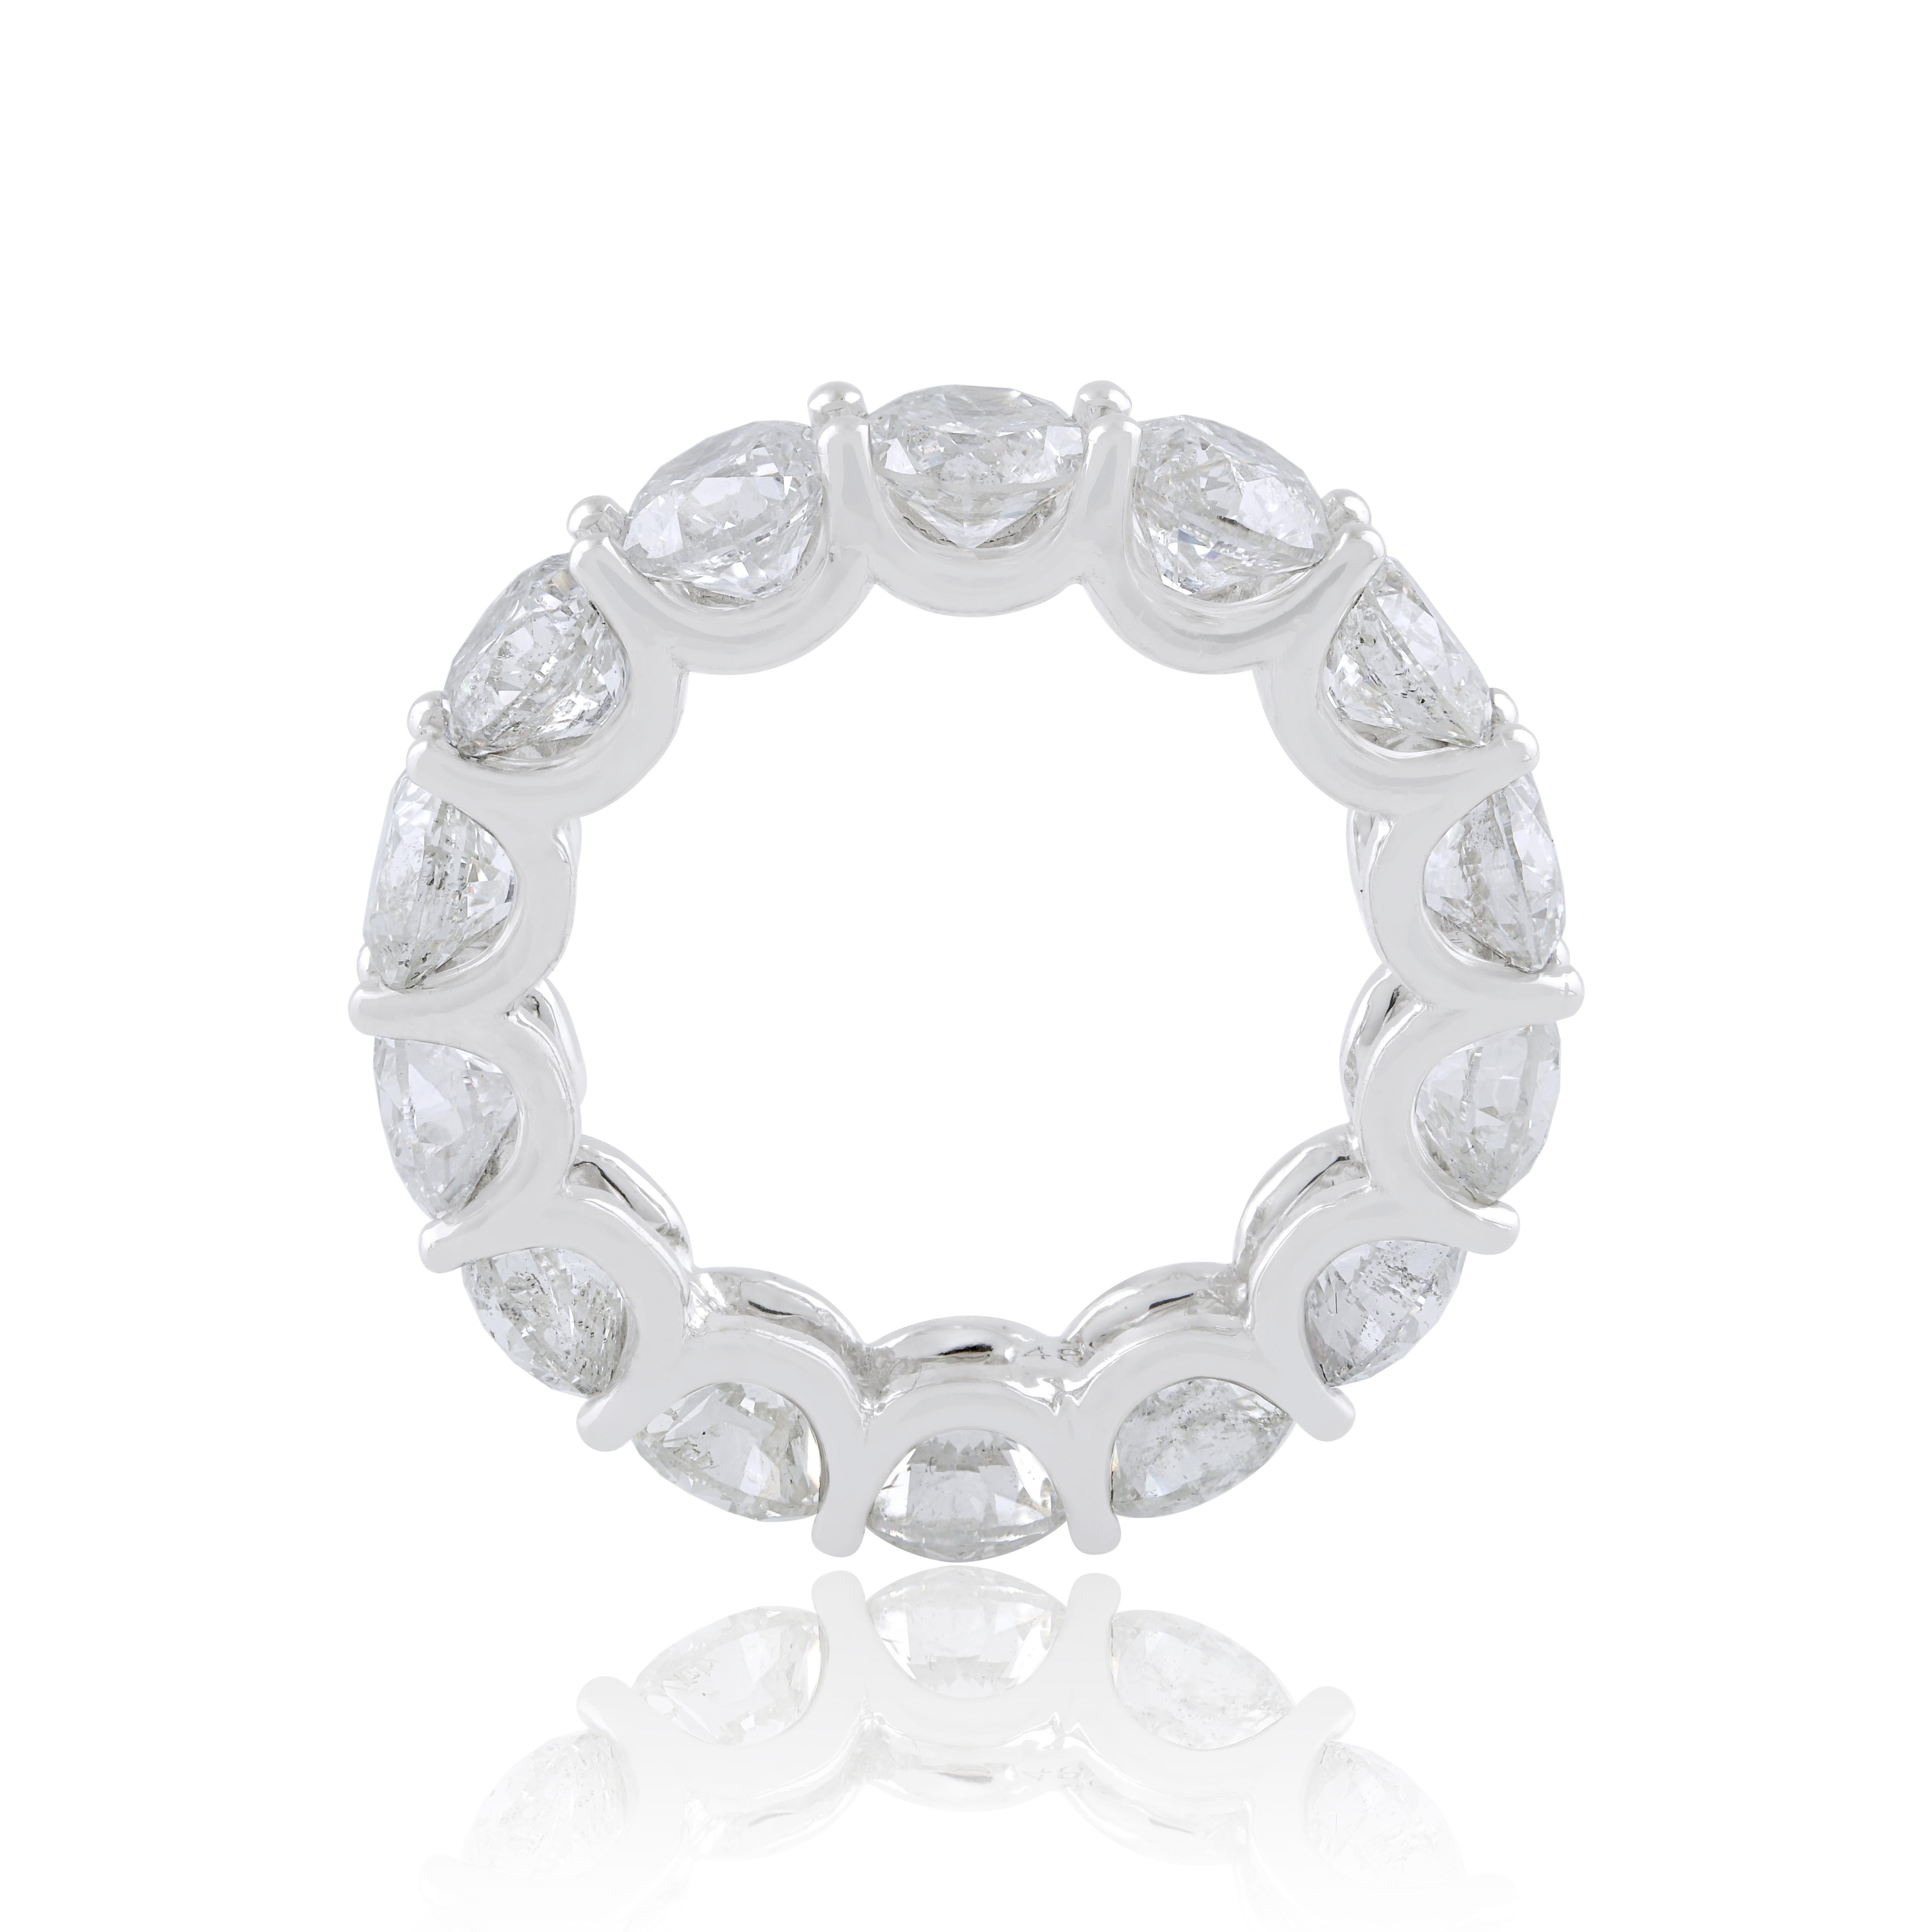 For Sale:  SI Clarity HI Color Round Diamond Eternity Band Ring 18k White Gold Fine Jewelry 2